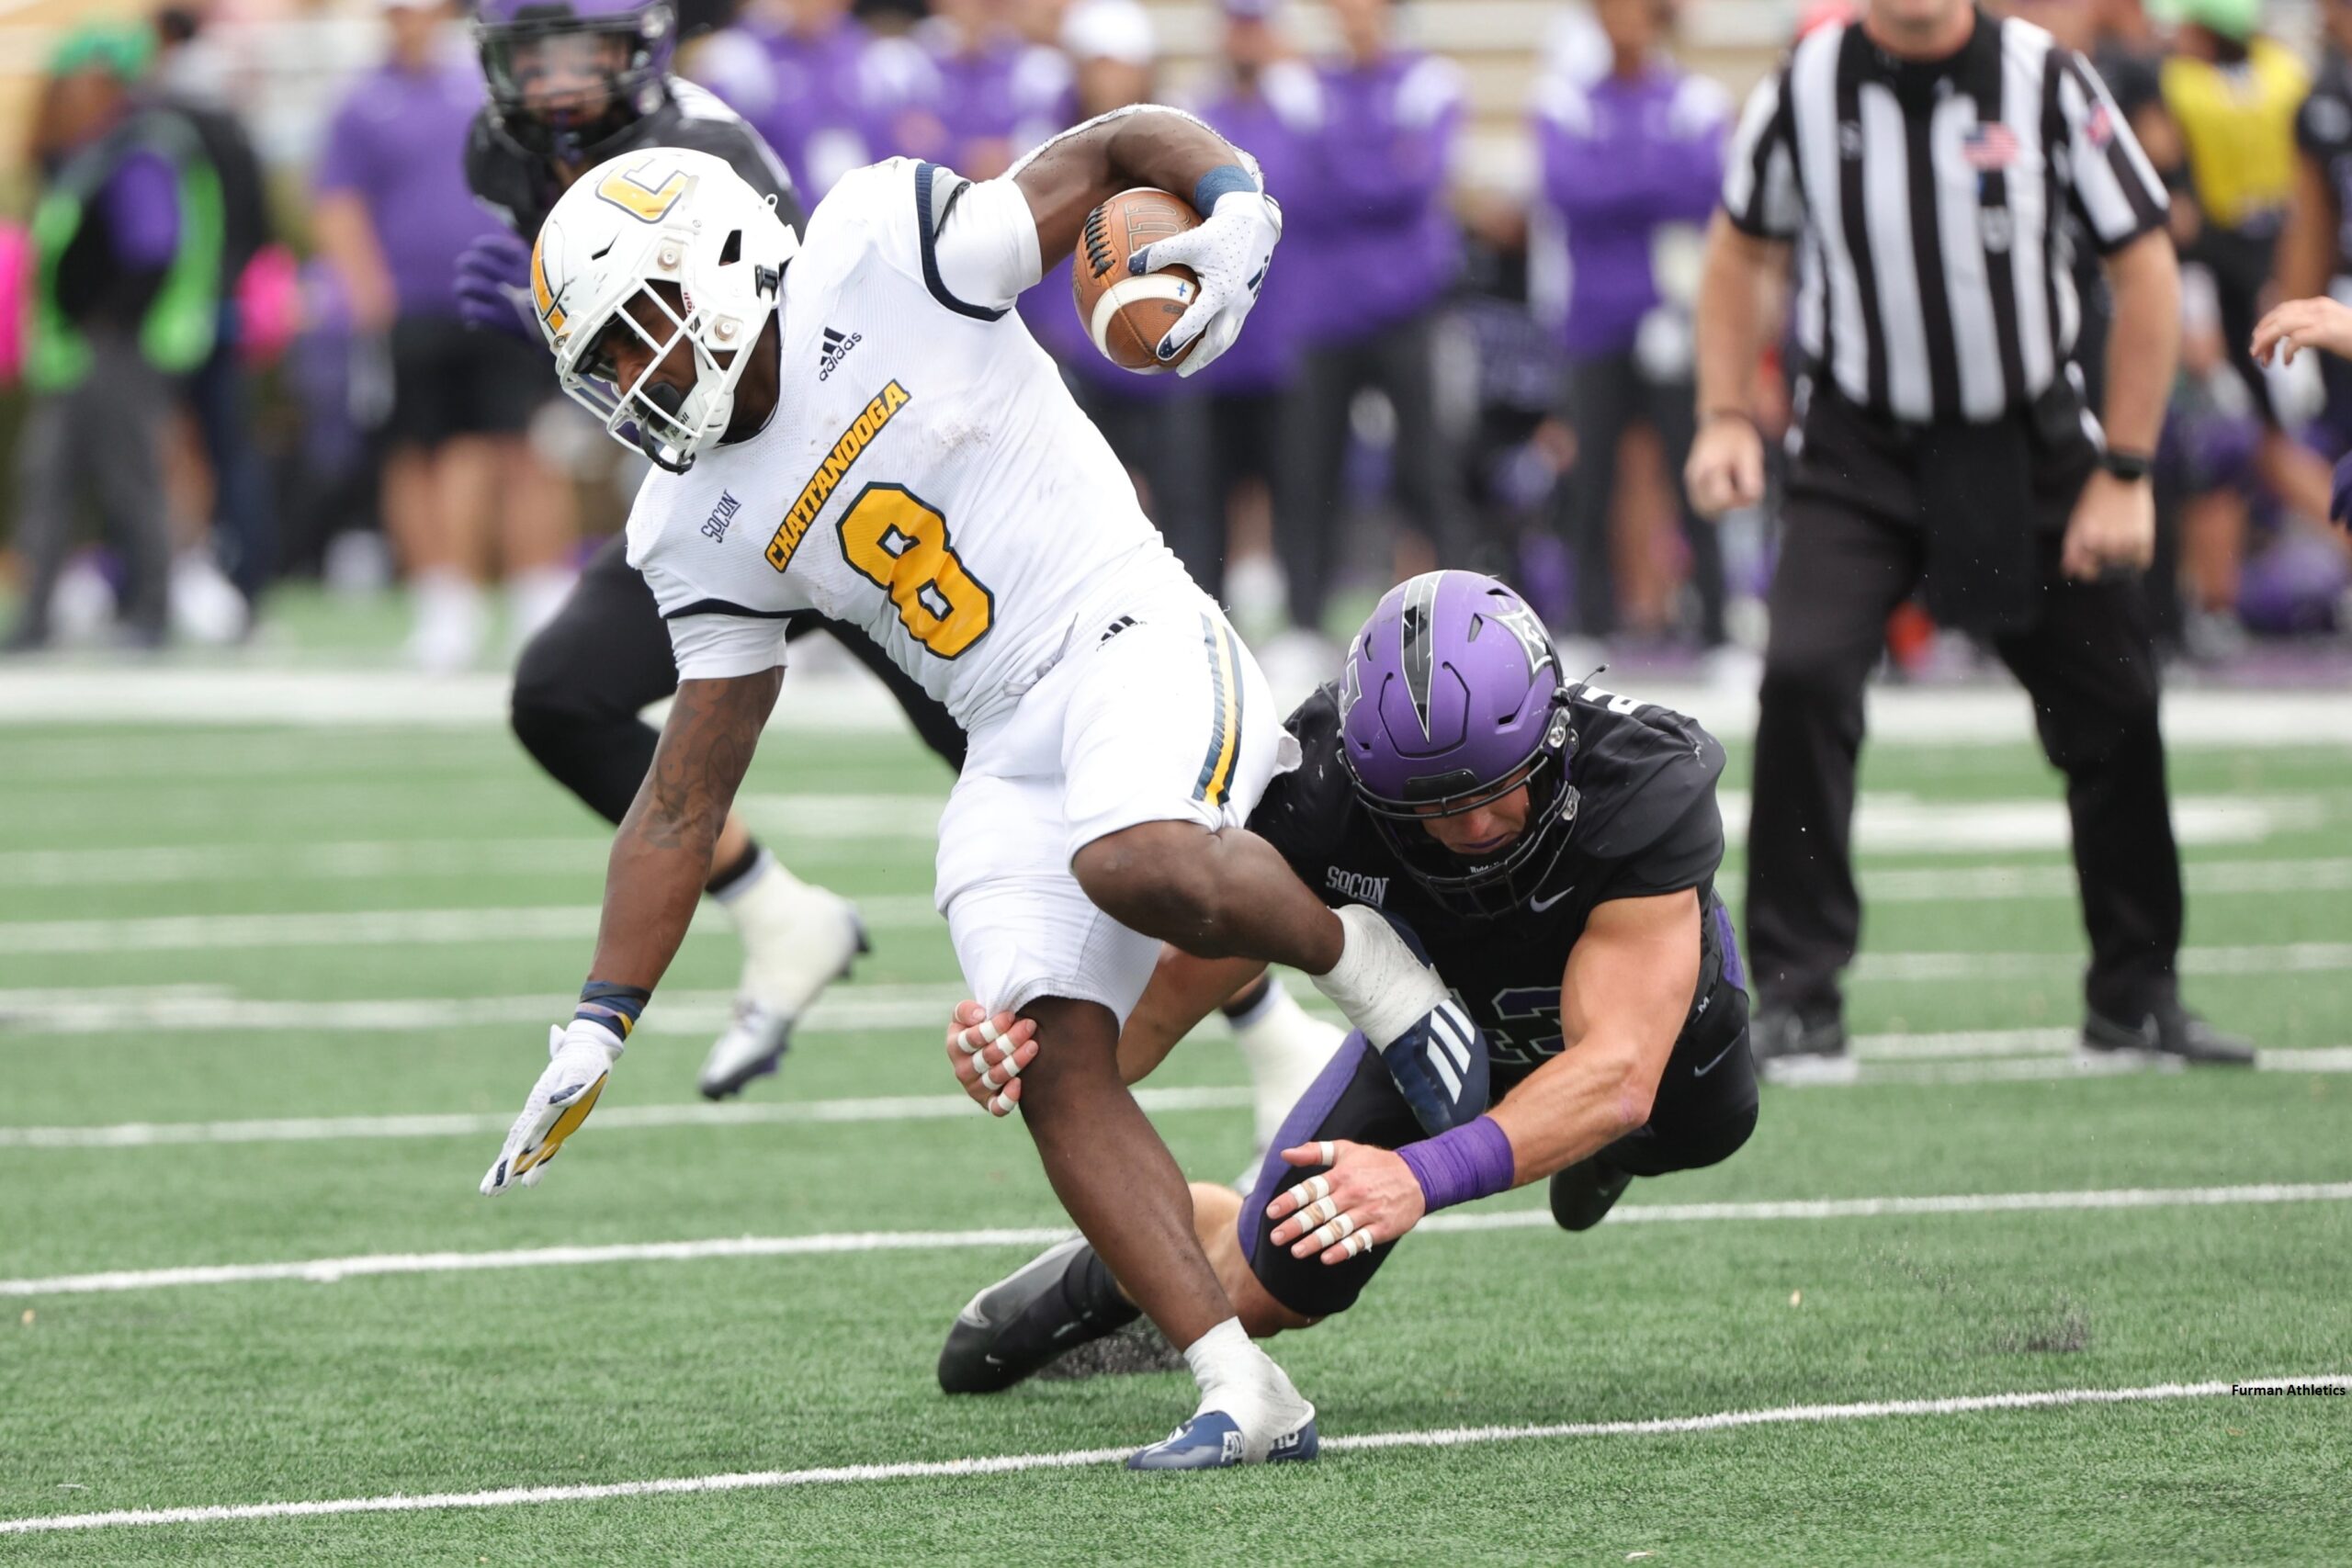 SoCon Showdown One of Five FCS Top 25 Head-to-Head Matchups This Week